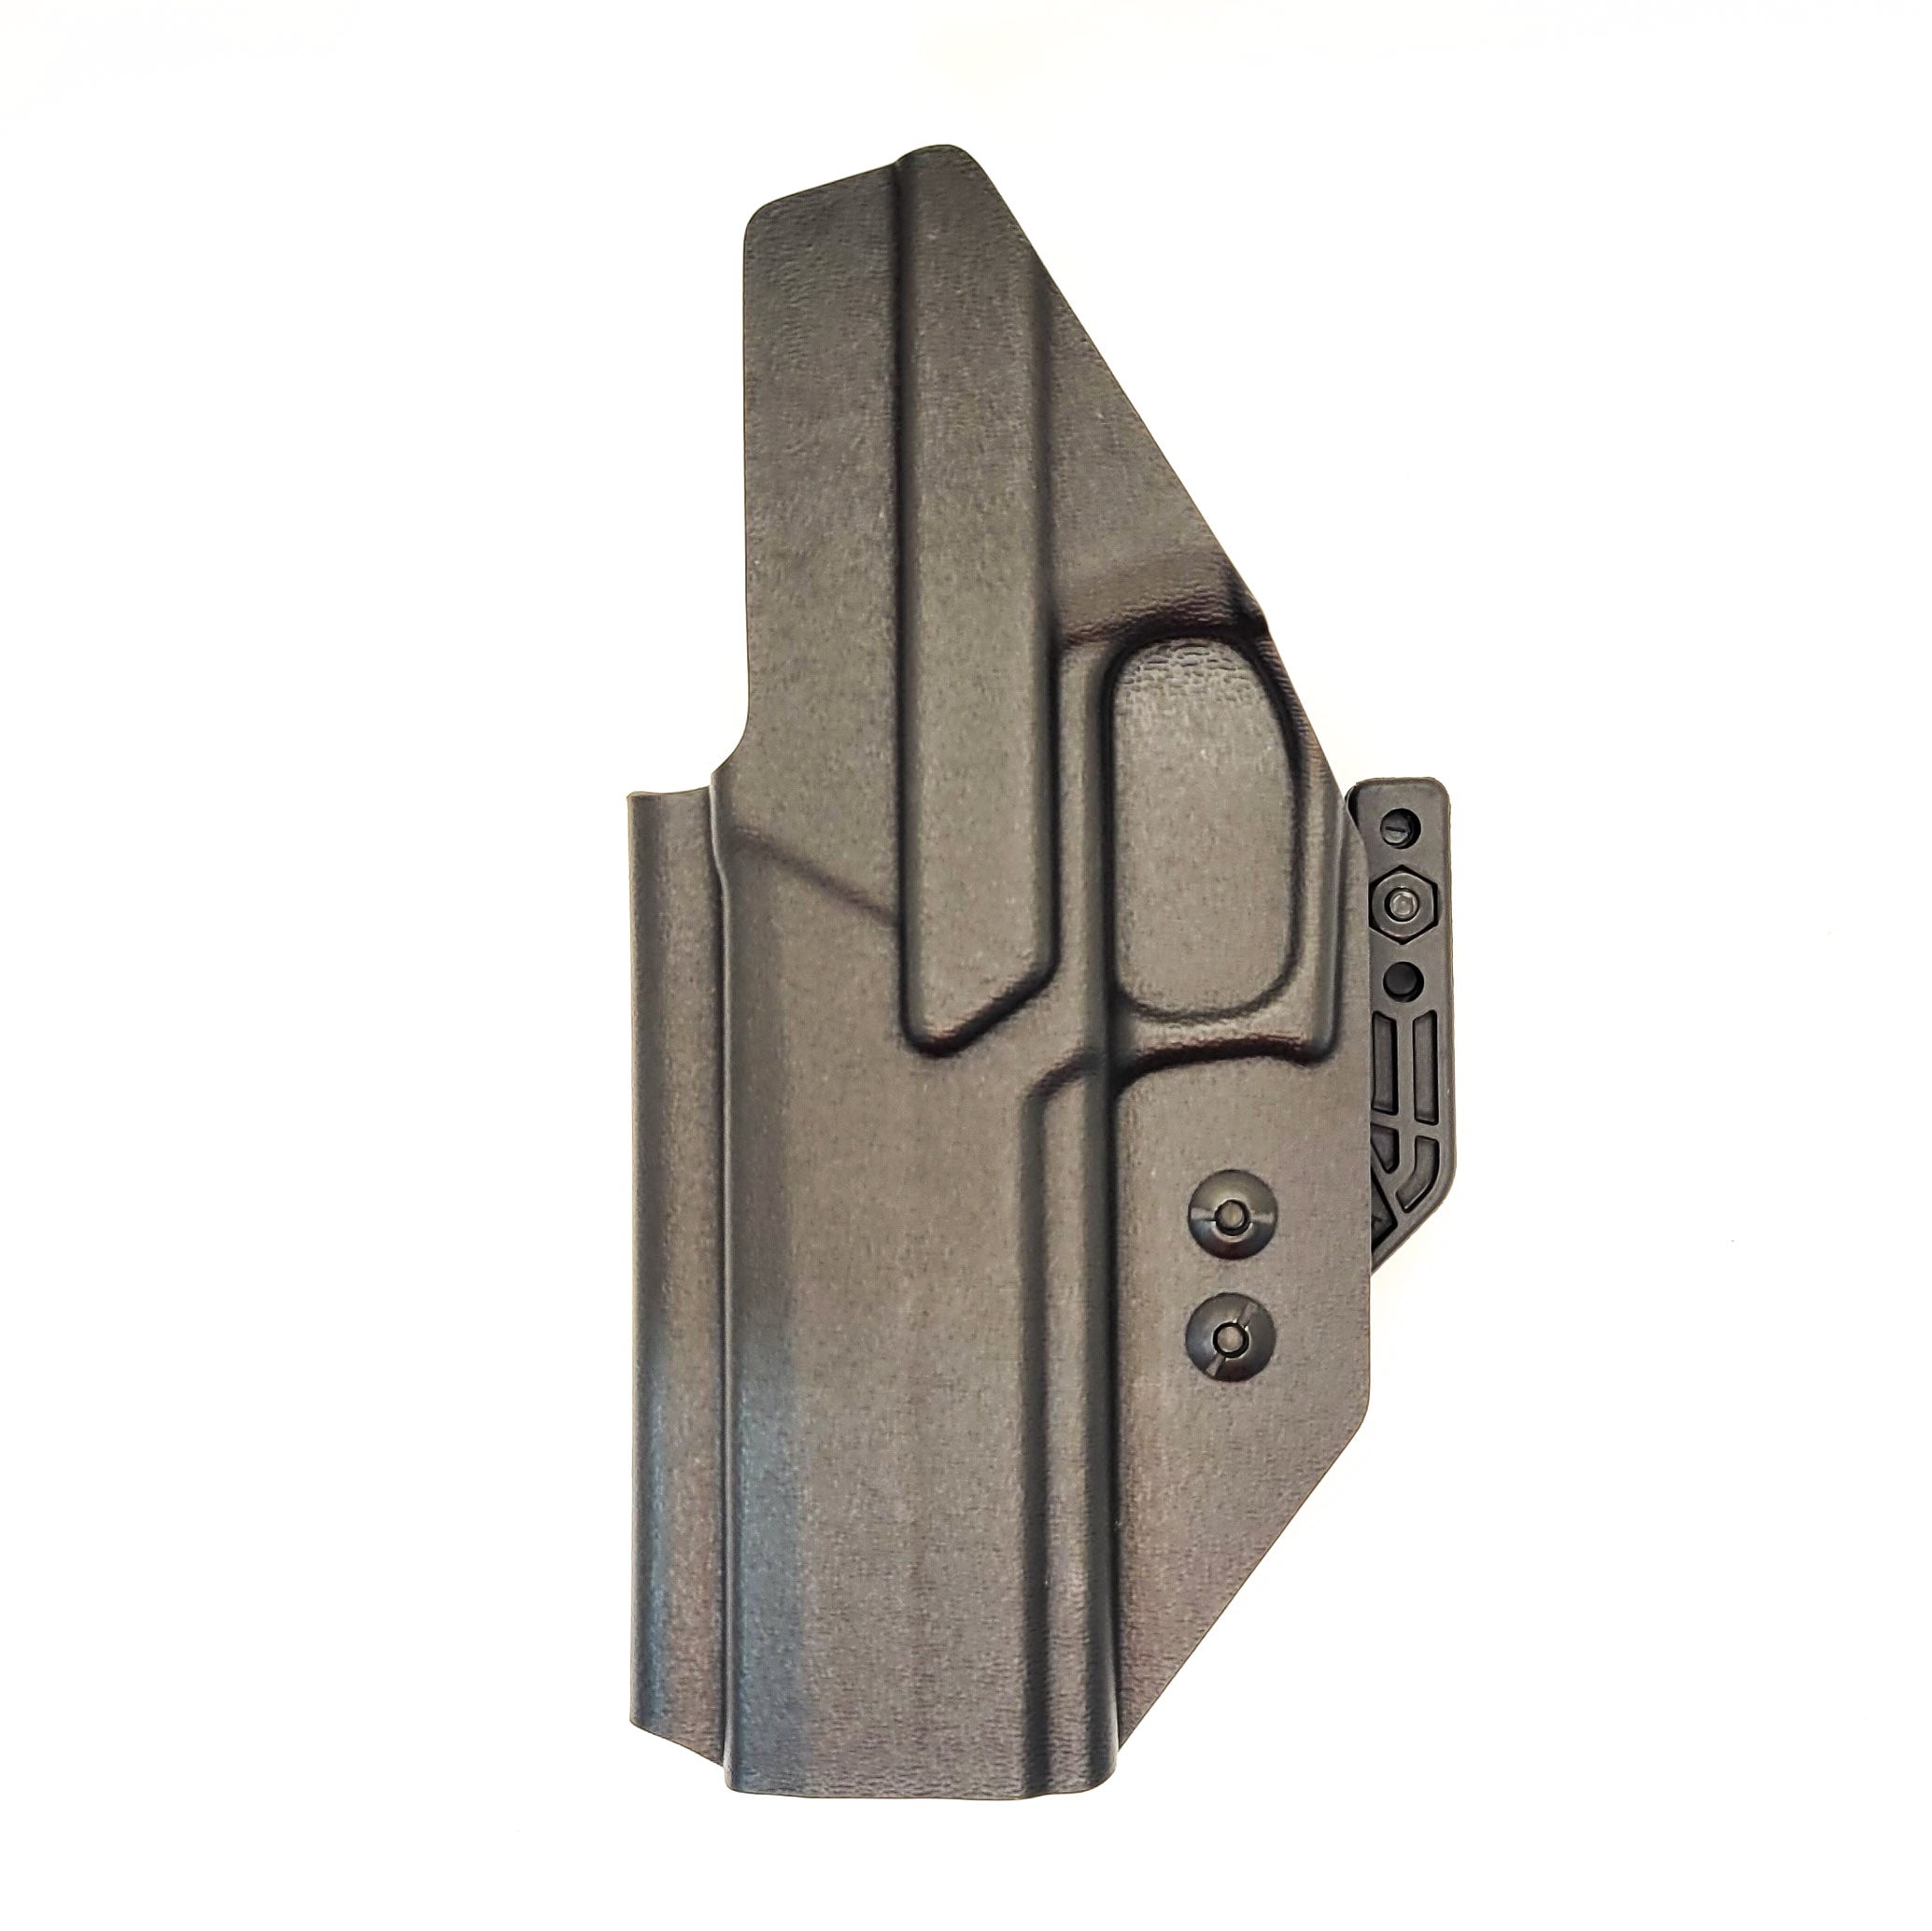 Our Inside Waistband holster for the Sig Sauer P320-XTEN pistol is vacuum formed with a precision machined mold designed from a CAD model of the actual firearm. Each holster is formed, trimmed and folded in house. Final fit and function tests are done with the actual pistol to ensure the holster fits the gun and has the correct amount of retention. The retention of the holster is easily adjusted so that the fit can be dialed in to your personal preference. 